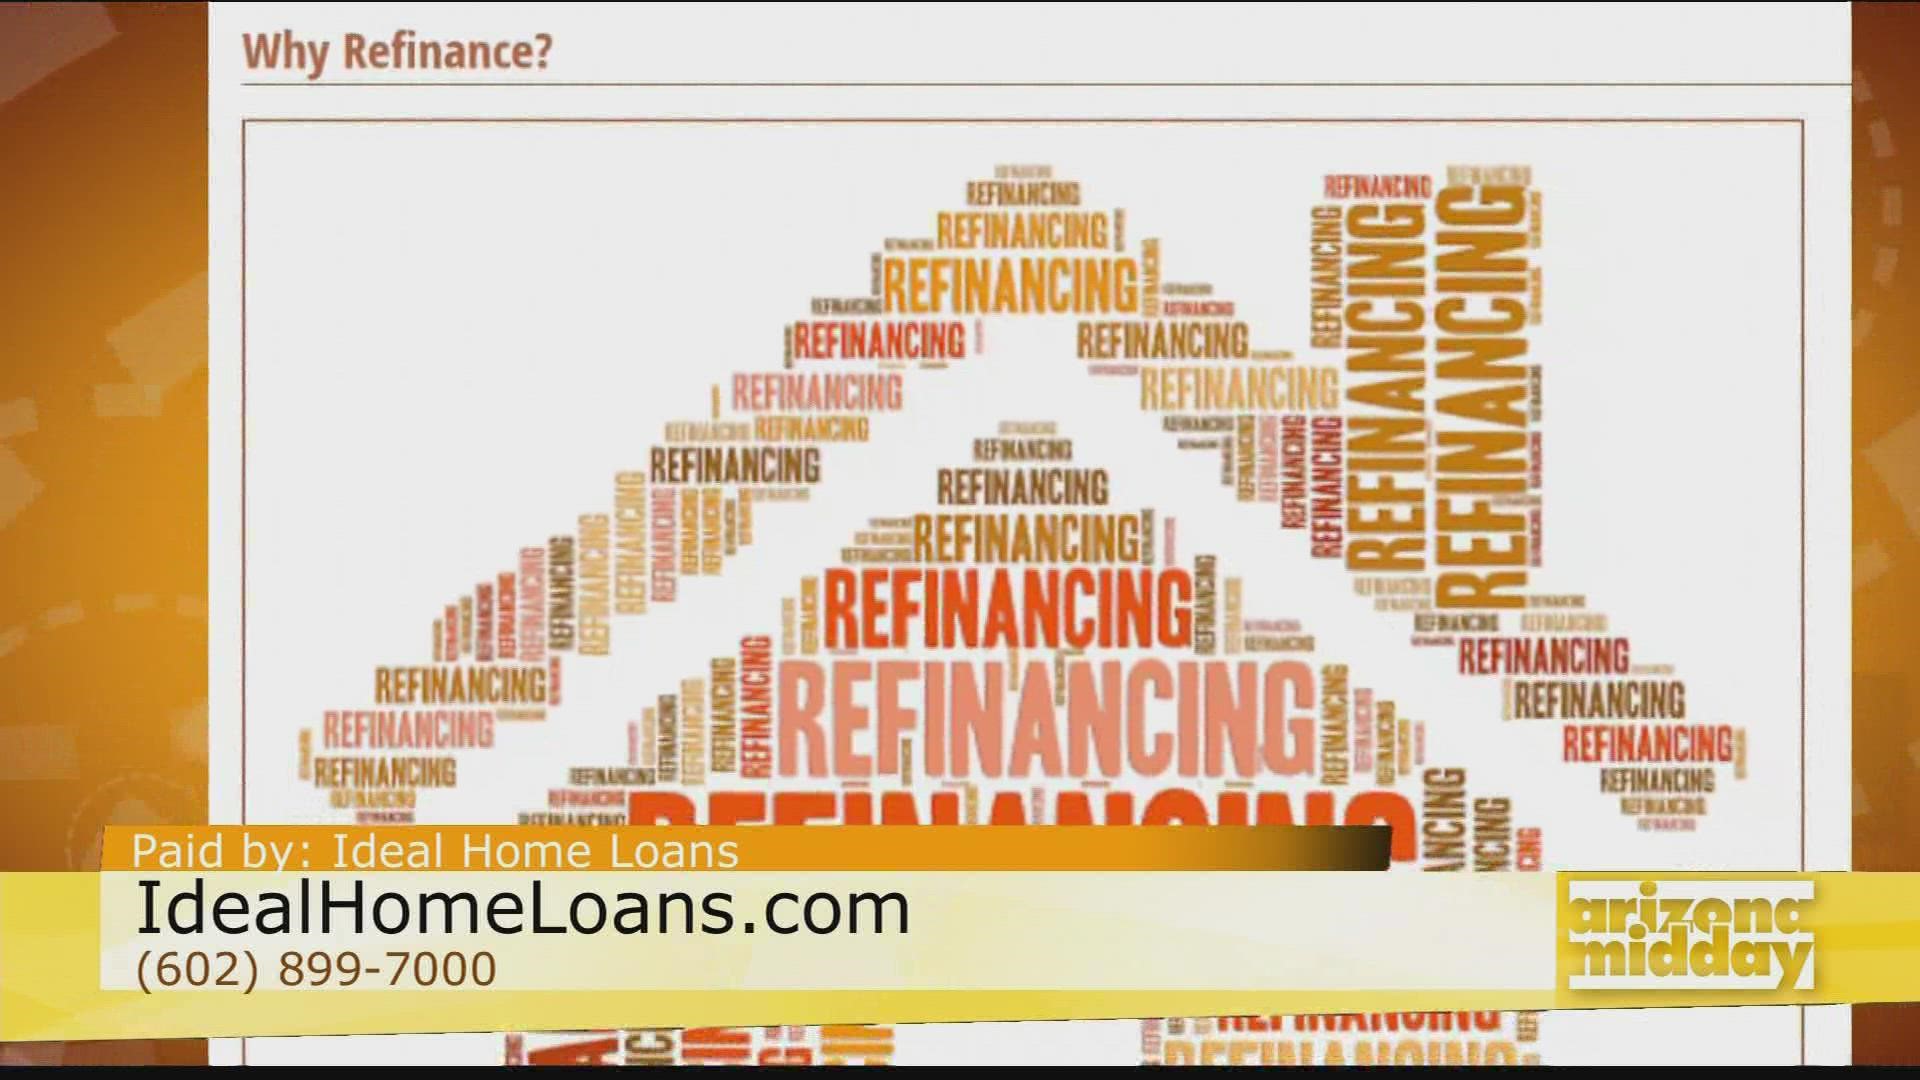 Ideal Home Loans' Brent Ivinson shares how refinancing your home can help lower your debts.